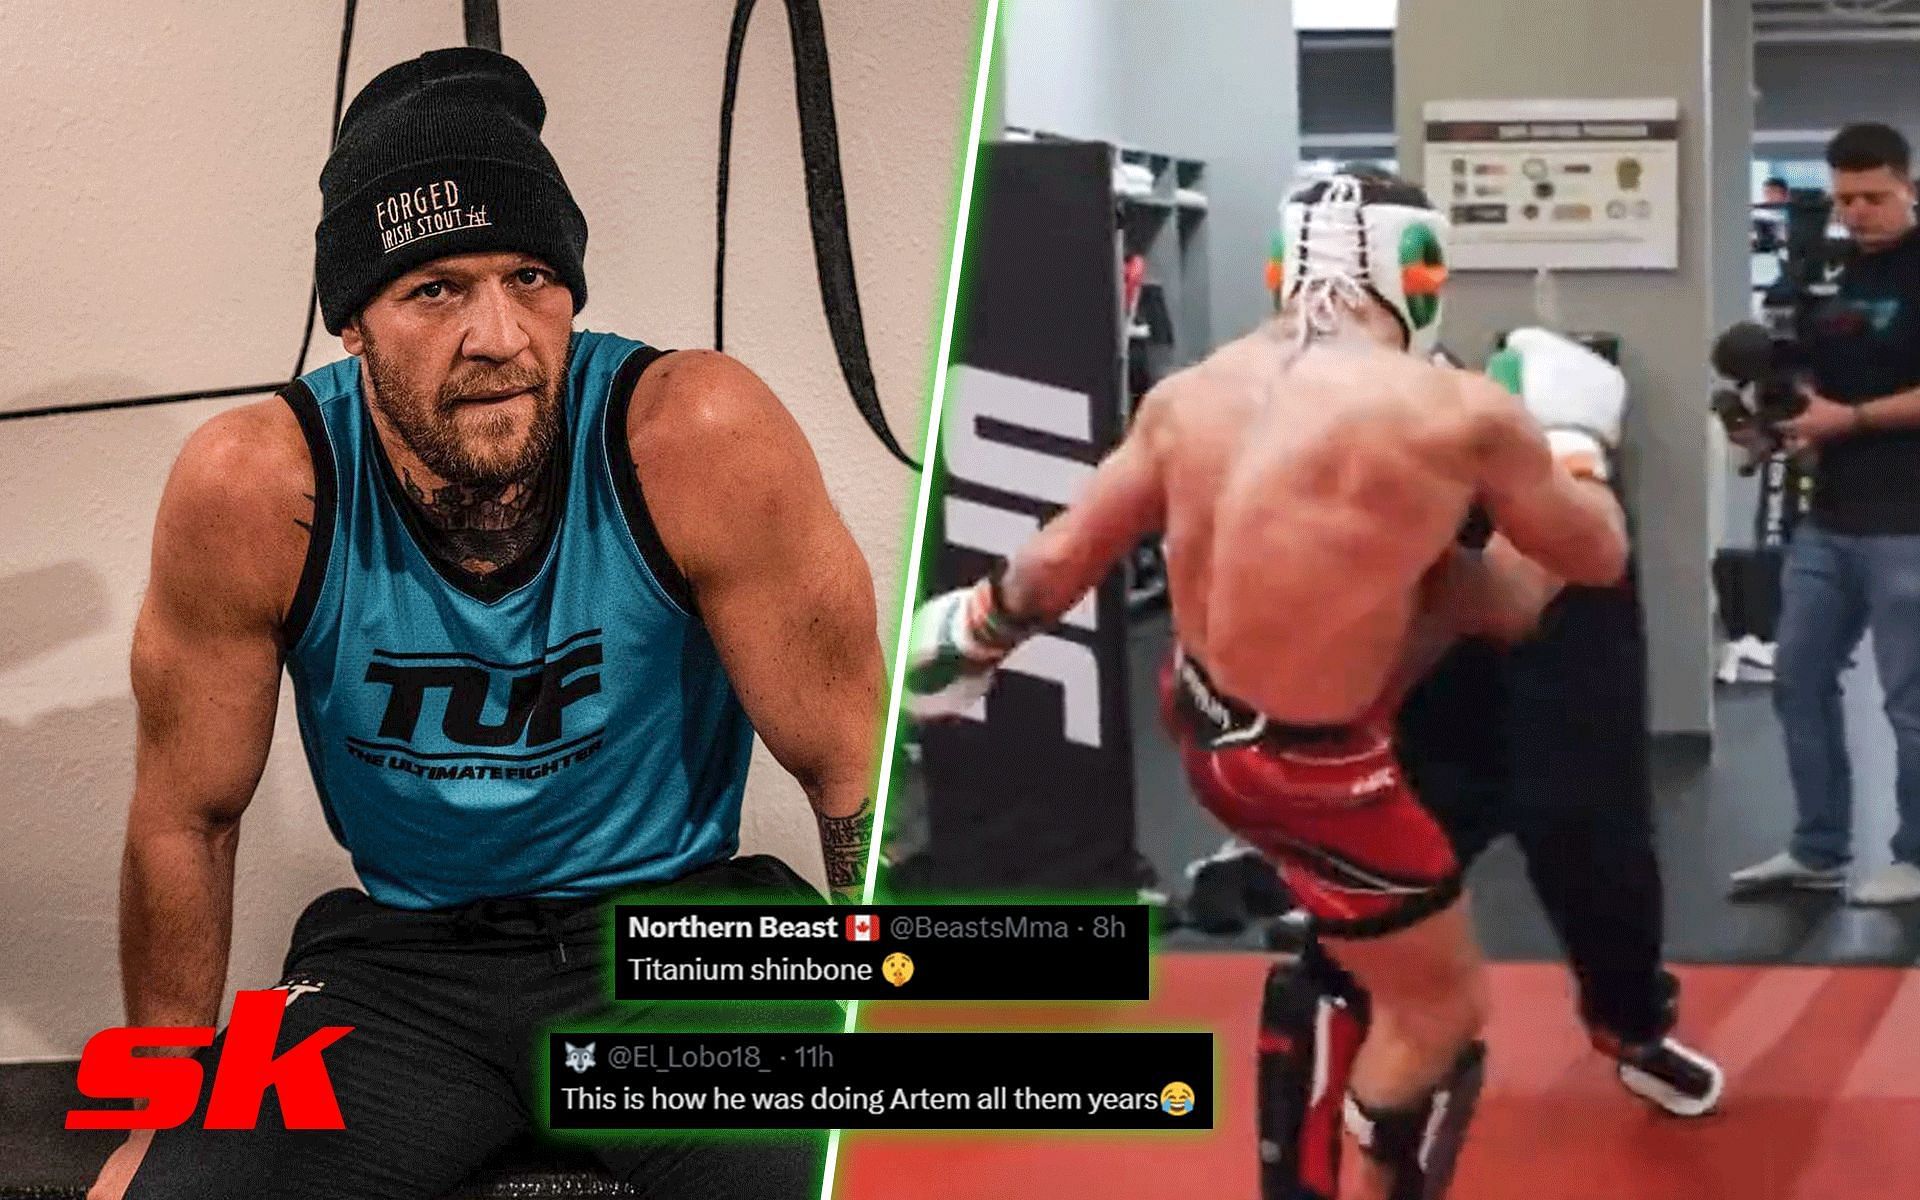 Conor McGregor (left) and sparring image (right) [Image credits: @thenotoriousmma on Instagram and @BenTheBaneDavis on Twitter] 